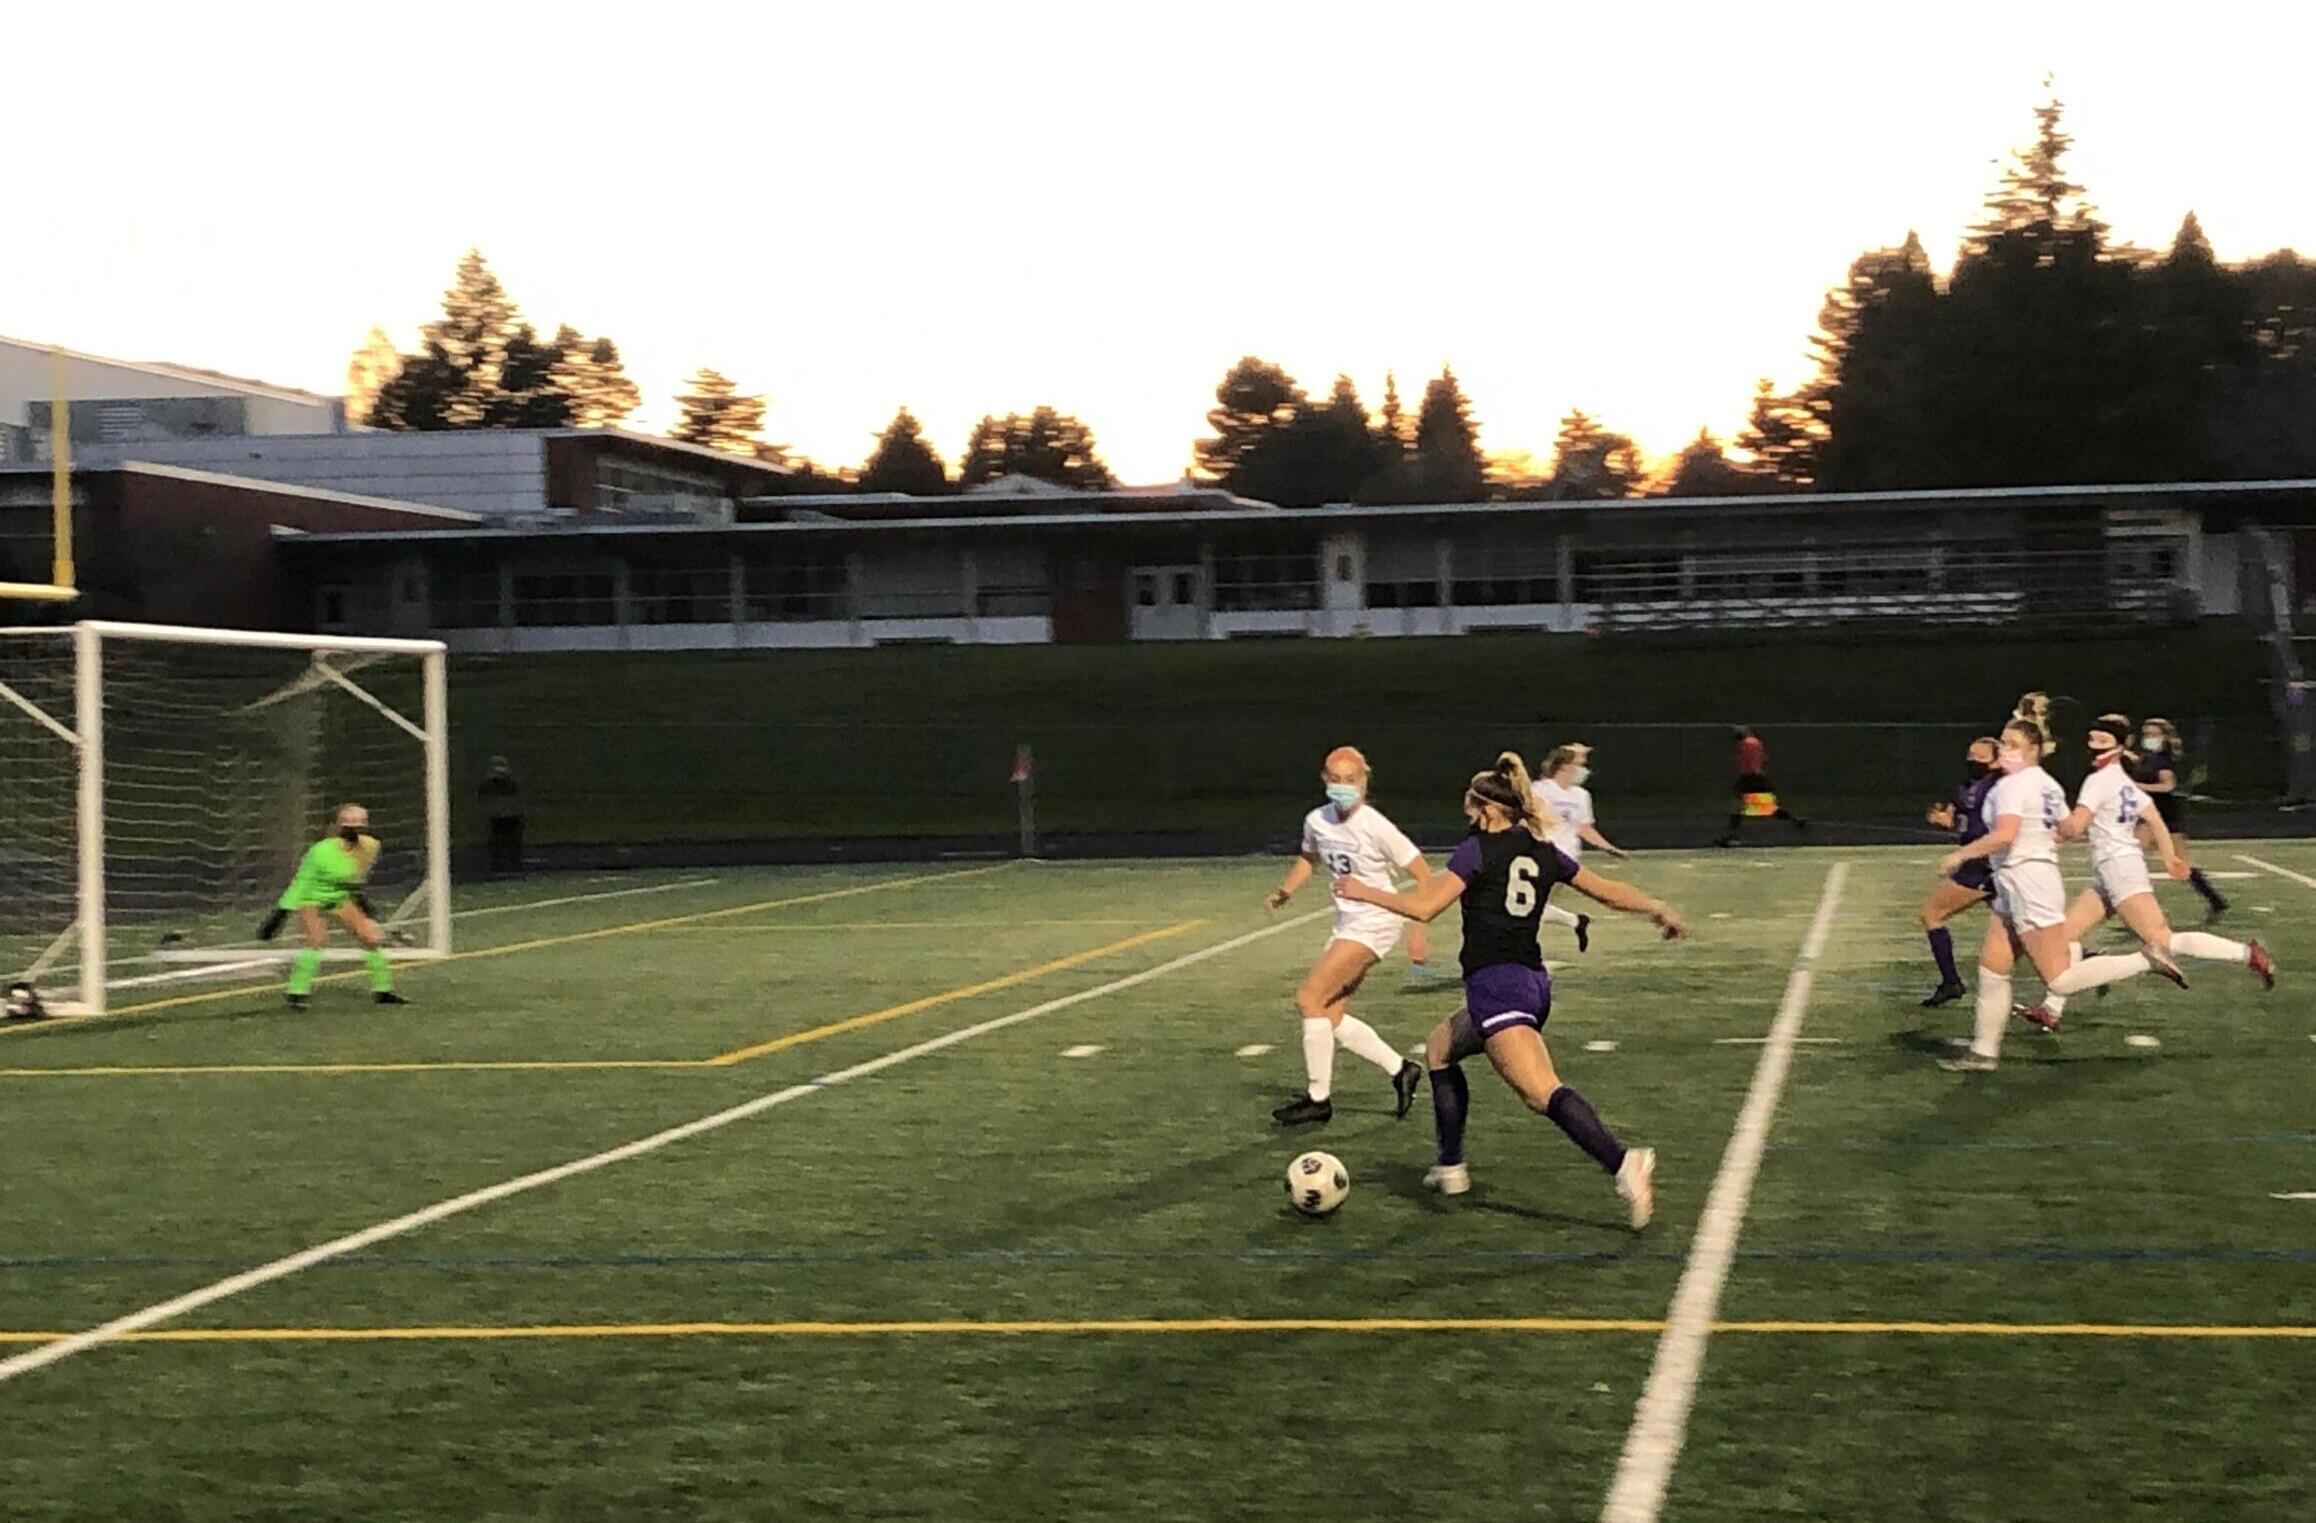 Columbia River forward Maree Seibel advances toward the goal while Cameron Jones of Ridgefield defends during a 2A district playoff game Tuesday at Columbia River High School.